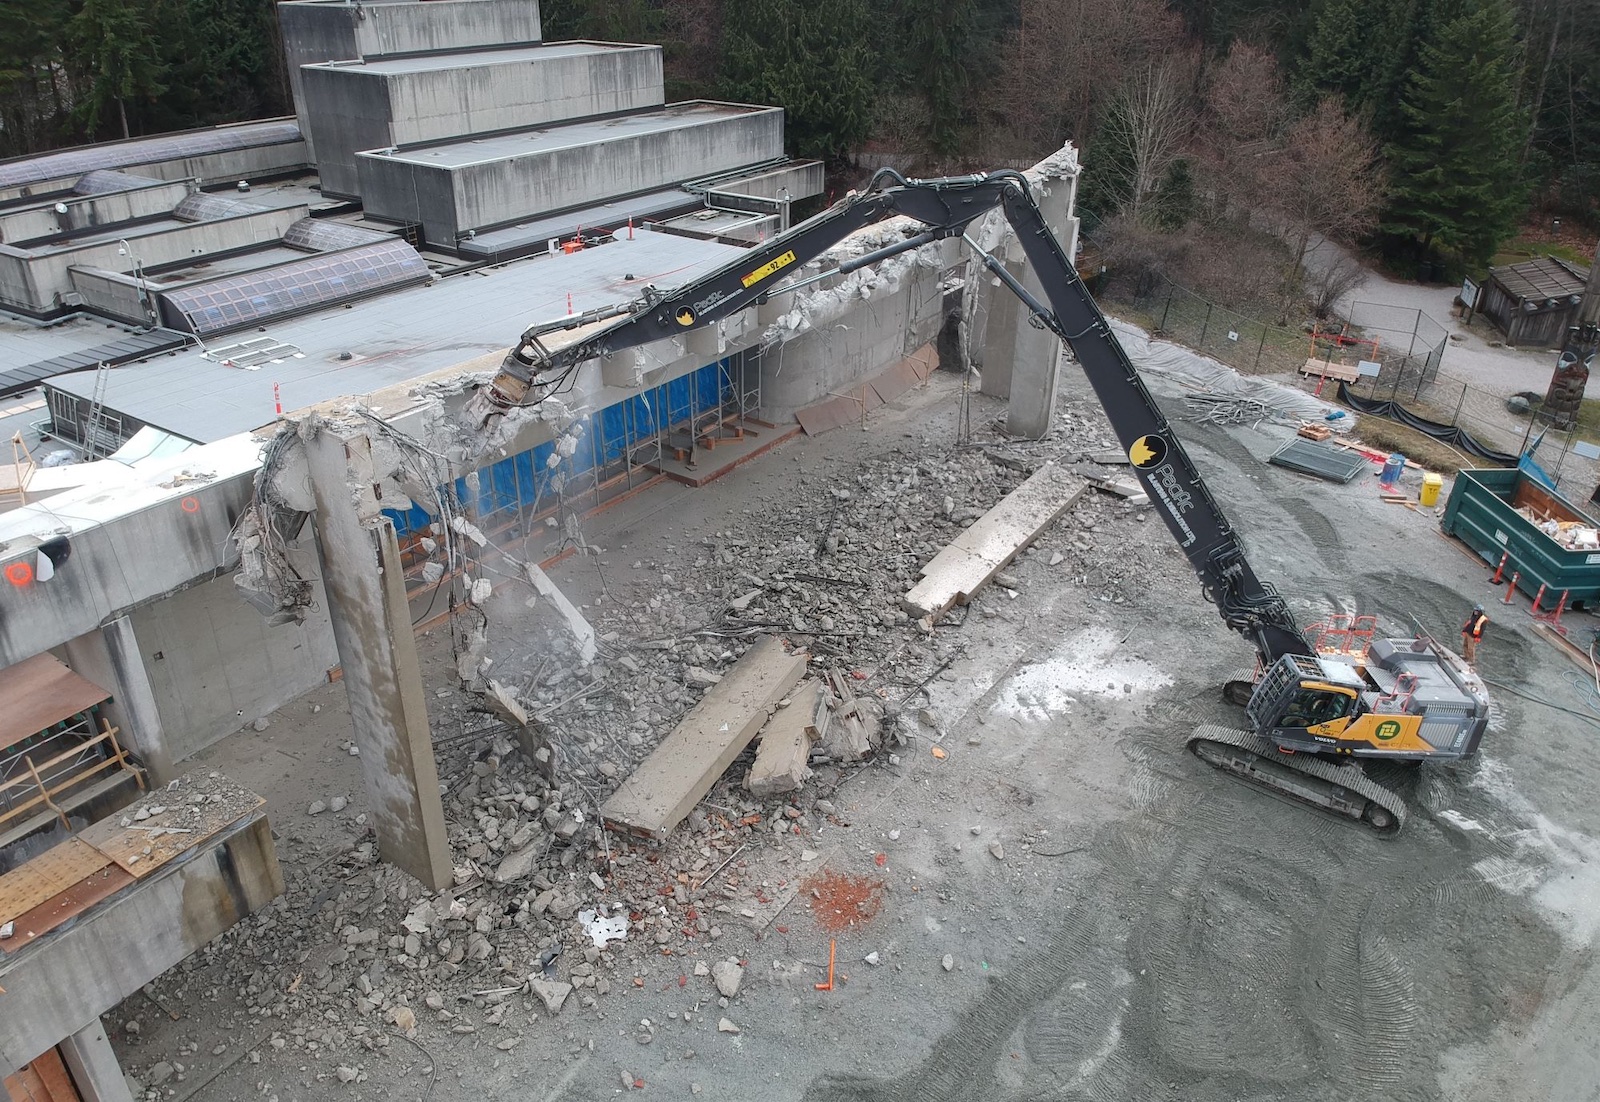 Aerial view of a concrete building with part of it demolished. Concrete rubble and an excavator can be seen in front of the building.